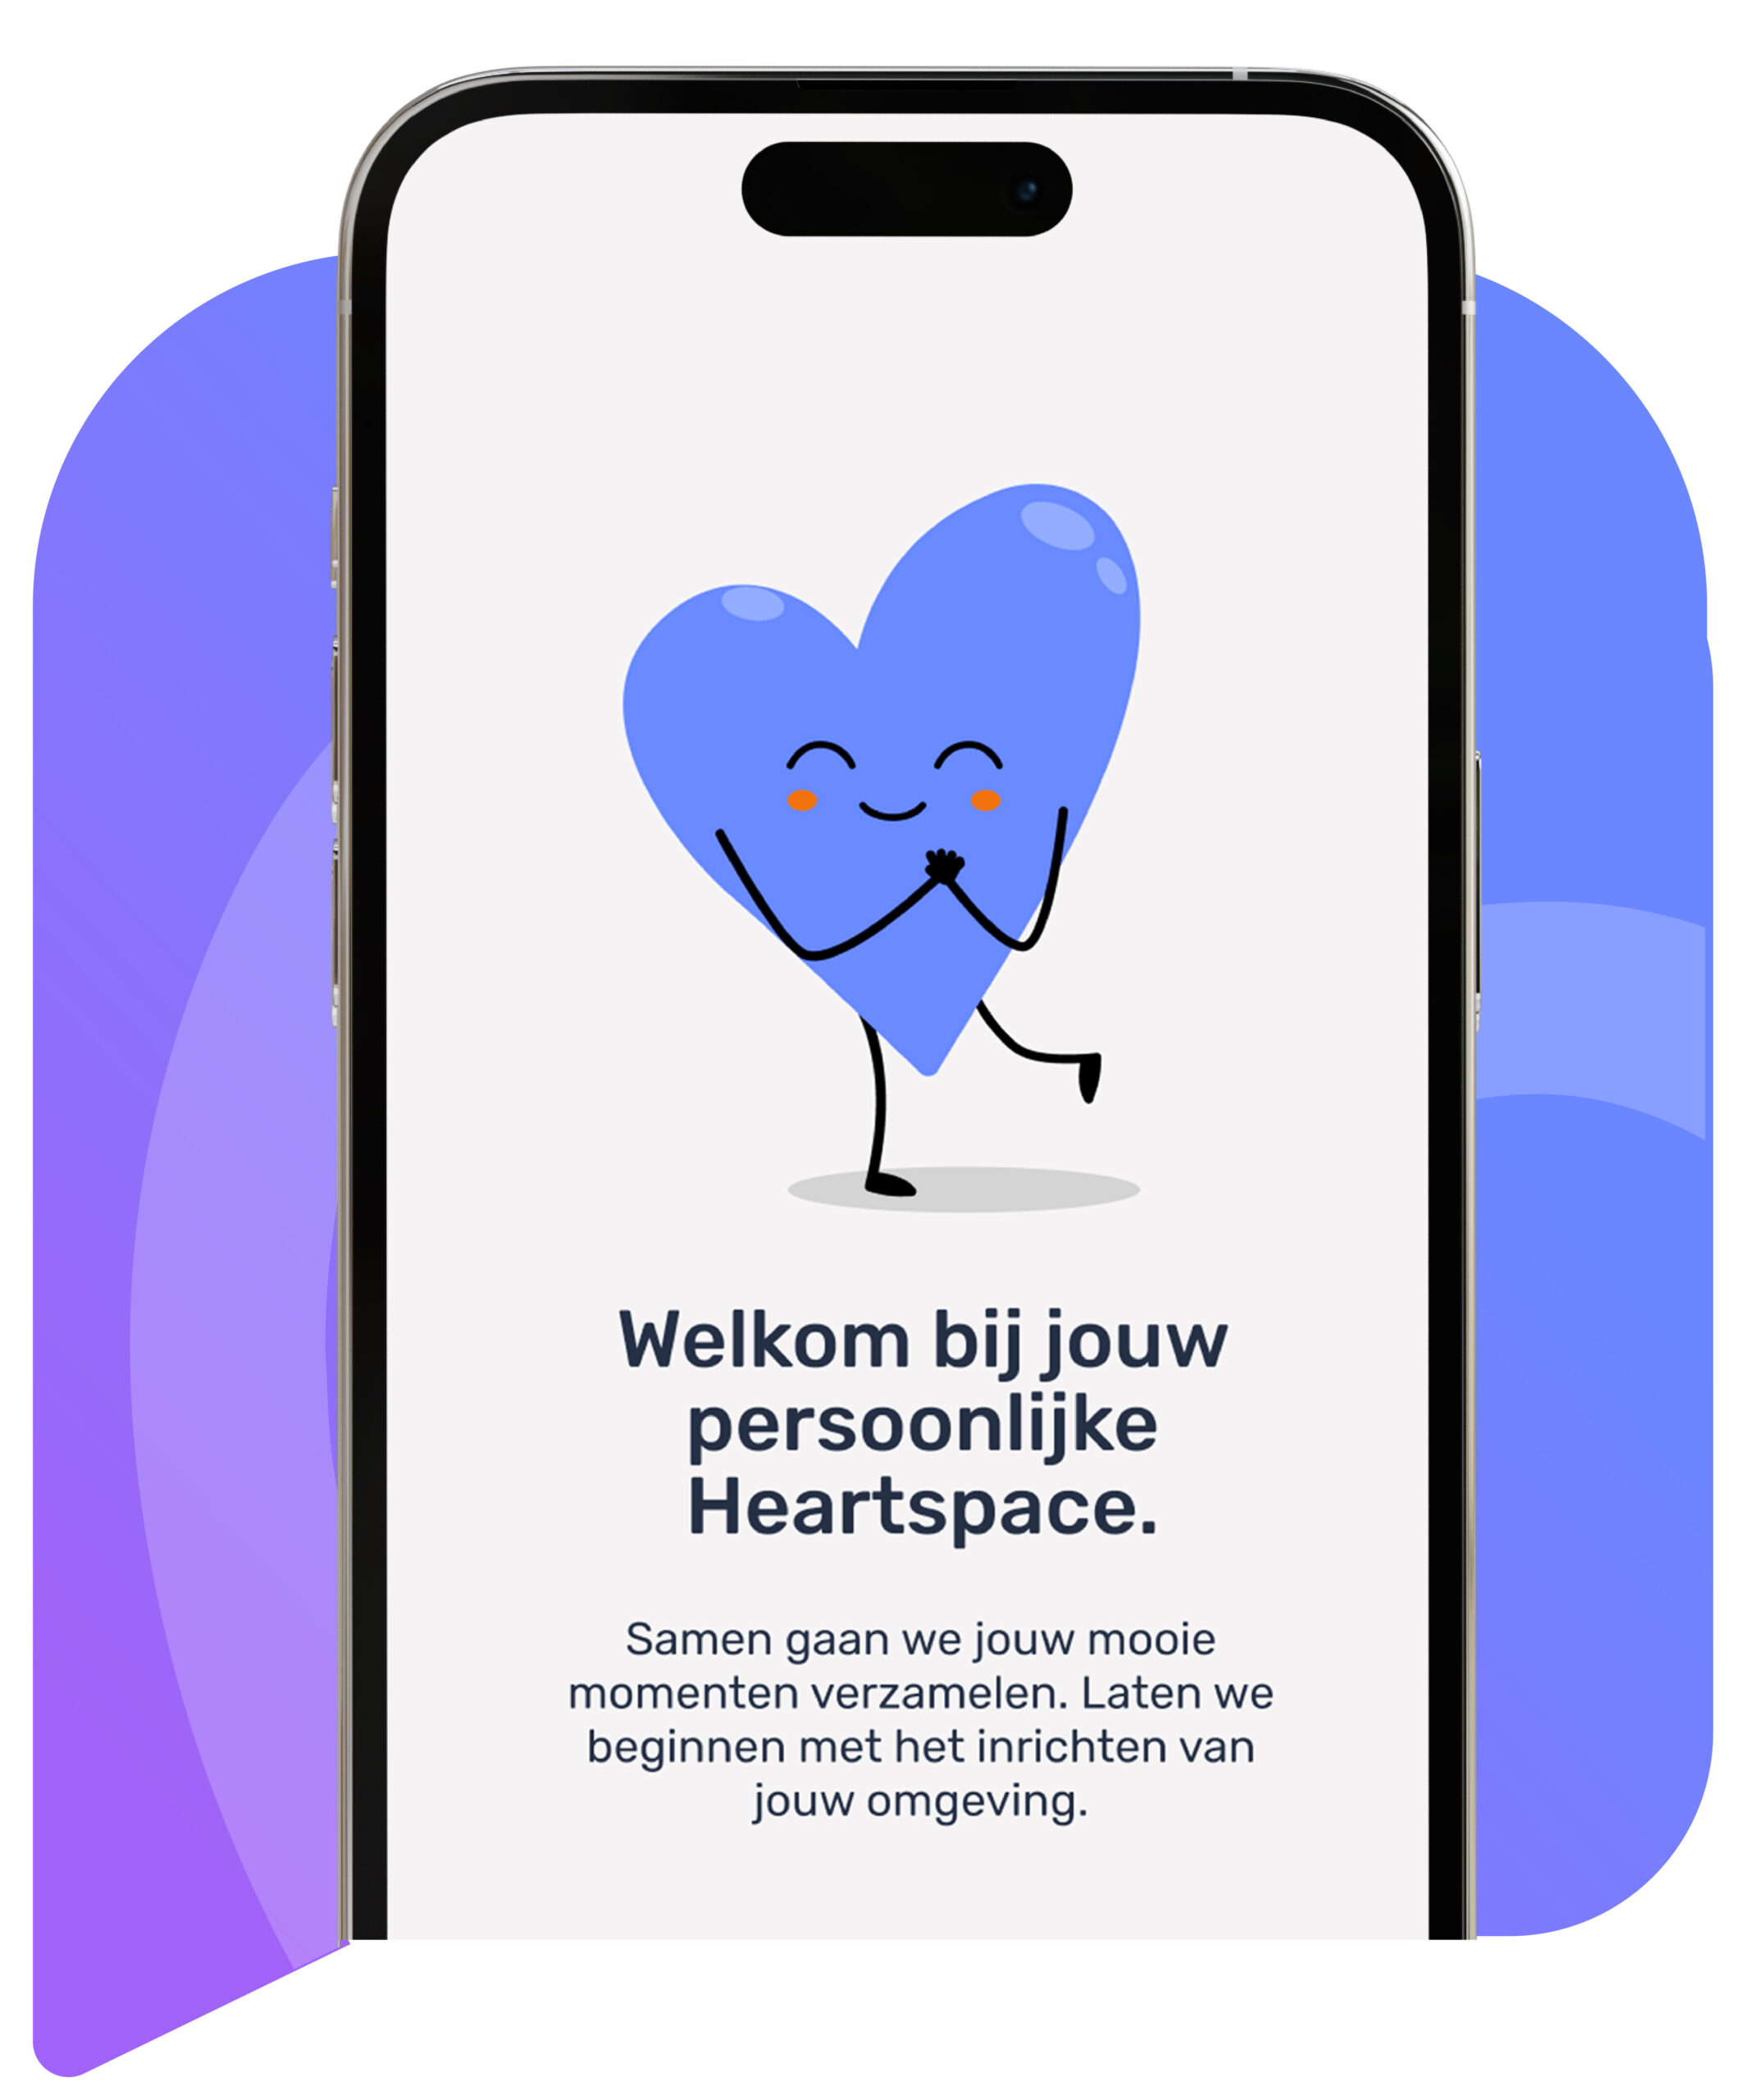 Screenshot of the My Heartspace app's login screen featuring Huggy, the app's mascot, alongside an informative text explaining the app's purpose: 'Together, we will collect your beautiful moments. Let's start by setting up your environment.' The screen combines welcoming graphics with clear, concise information, inviting users to begin their journey in the app